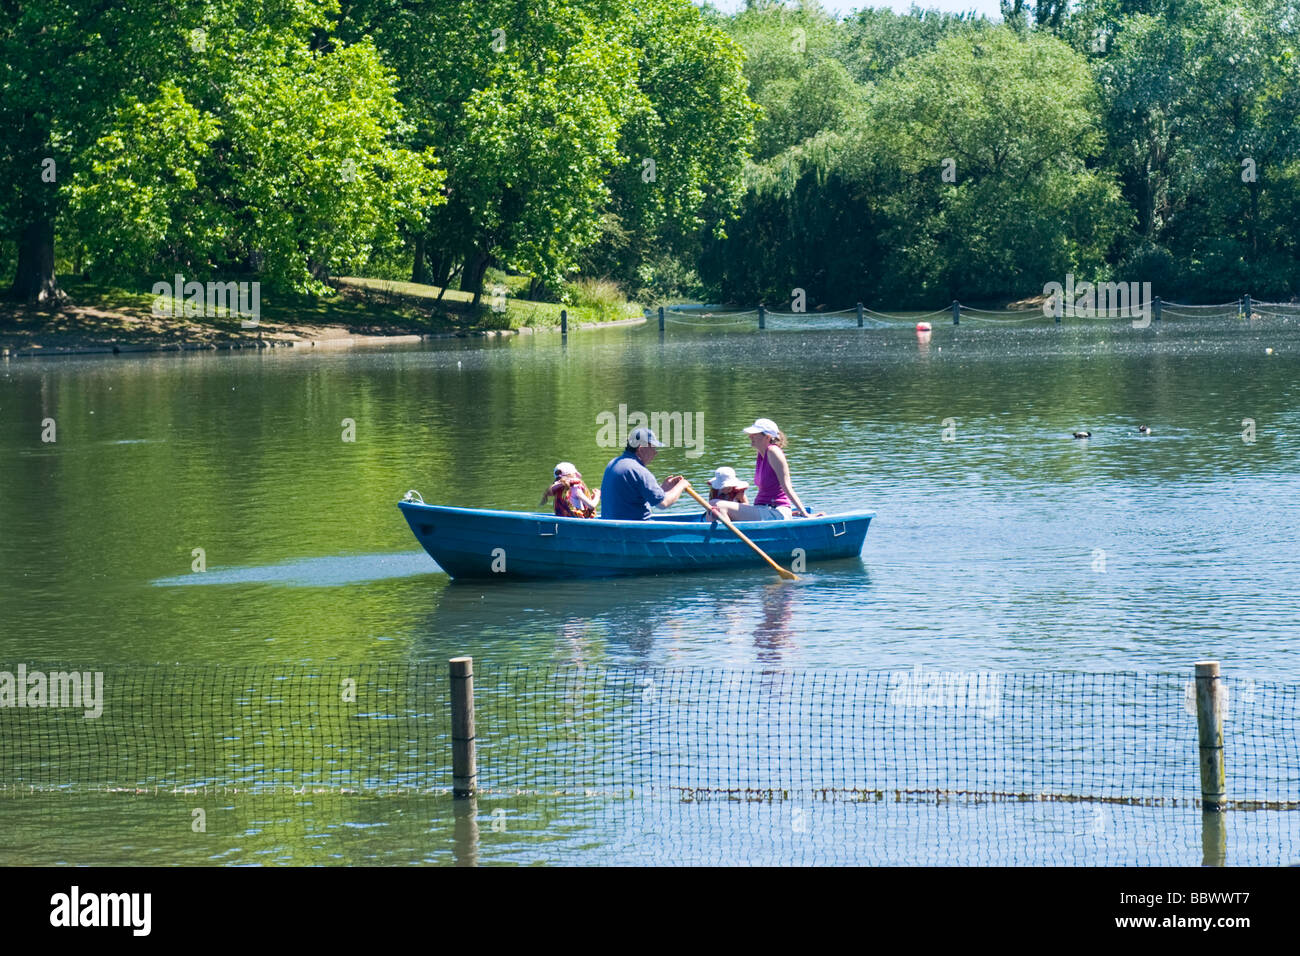 Regents Park Paddle Boat High Resolution Stock Photography and Images -  Alamy